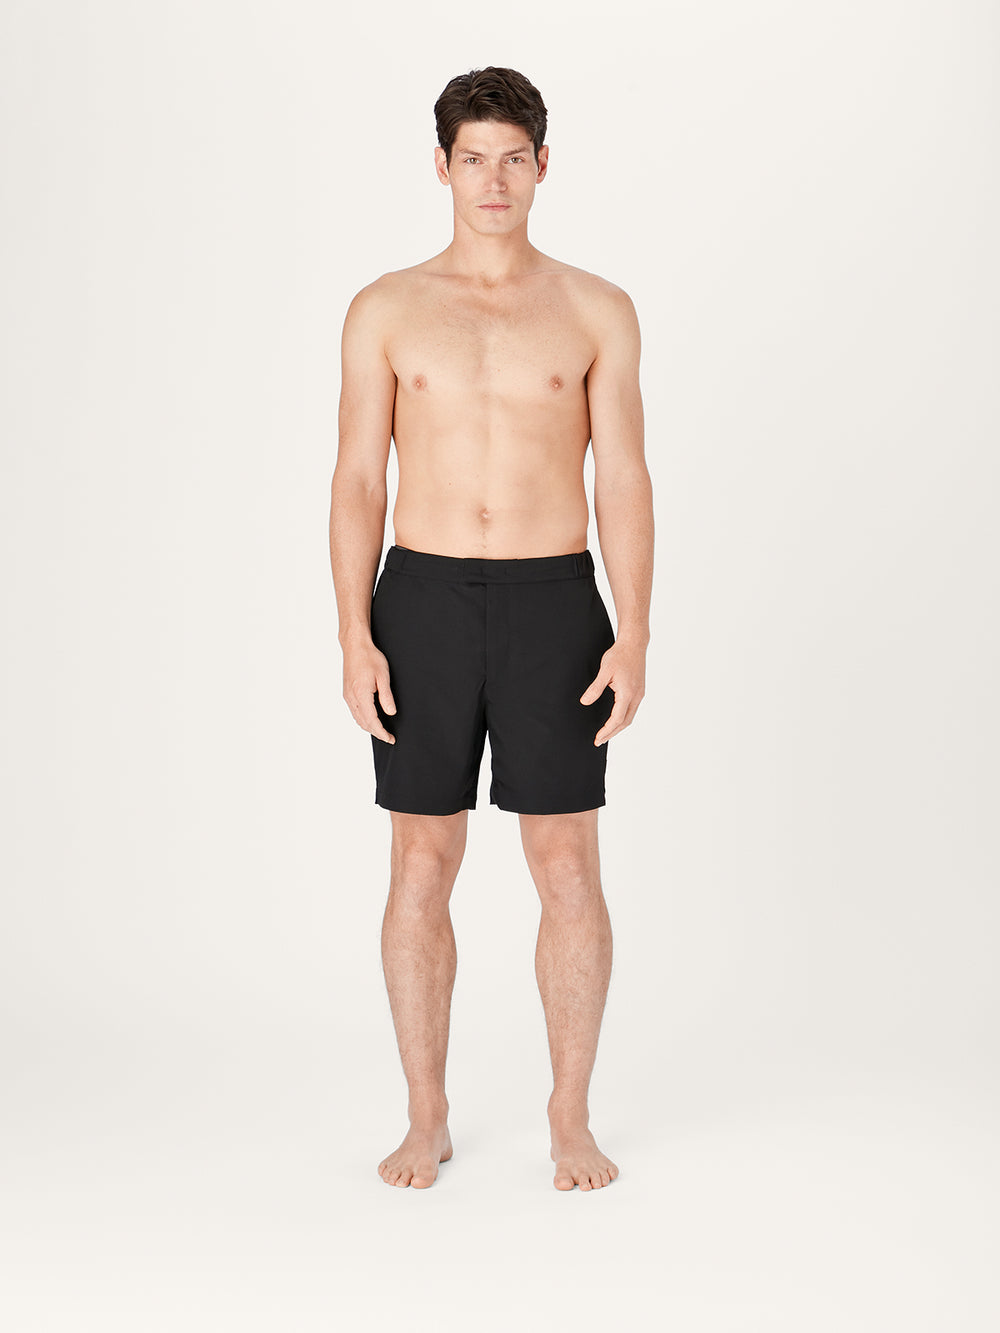 The Anywear Short 2.0 || Black | Recycled nylon without netting